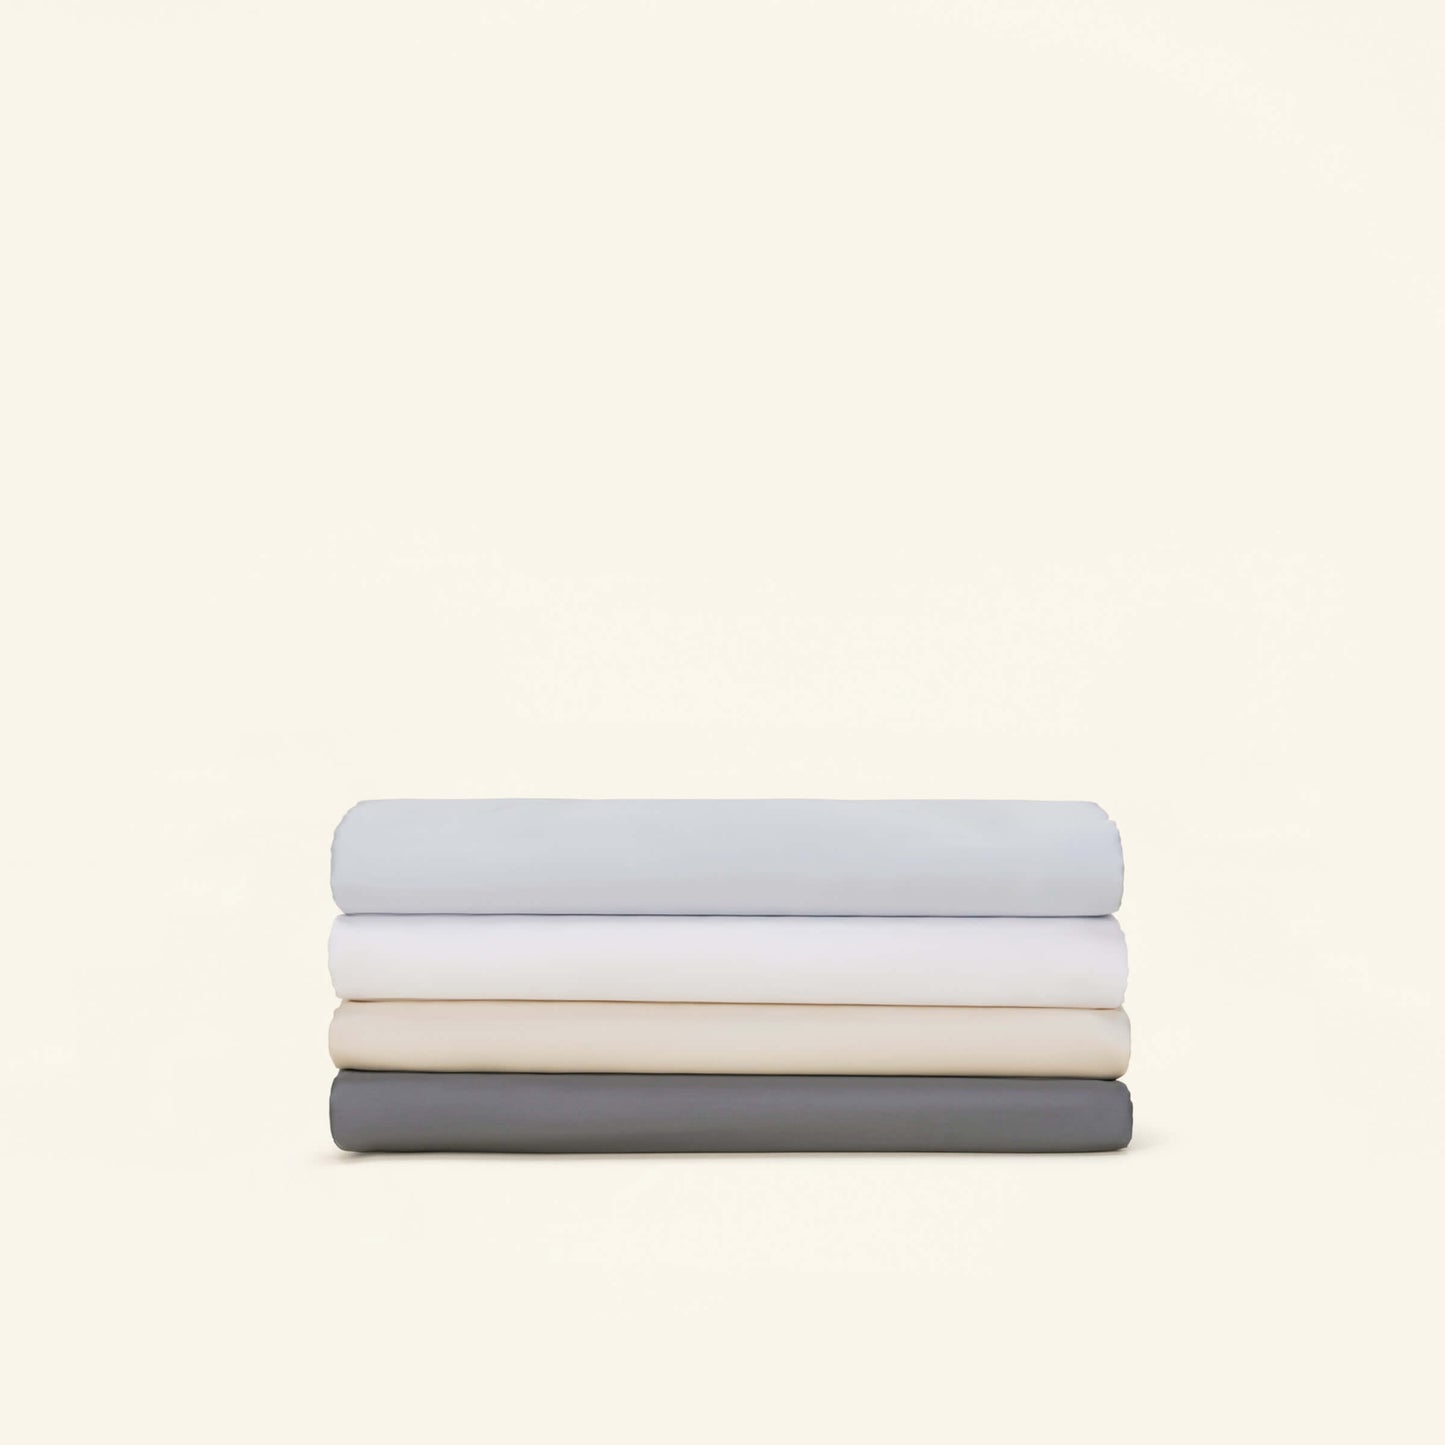 The Slumber Cloud Essential Duvet Cover with temperature regulation technology and Tencel to help you stay cool through the night.